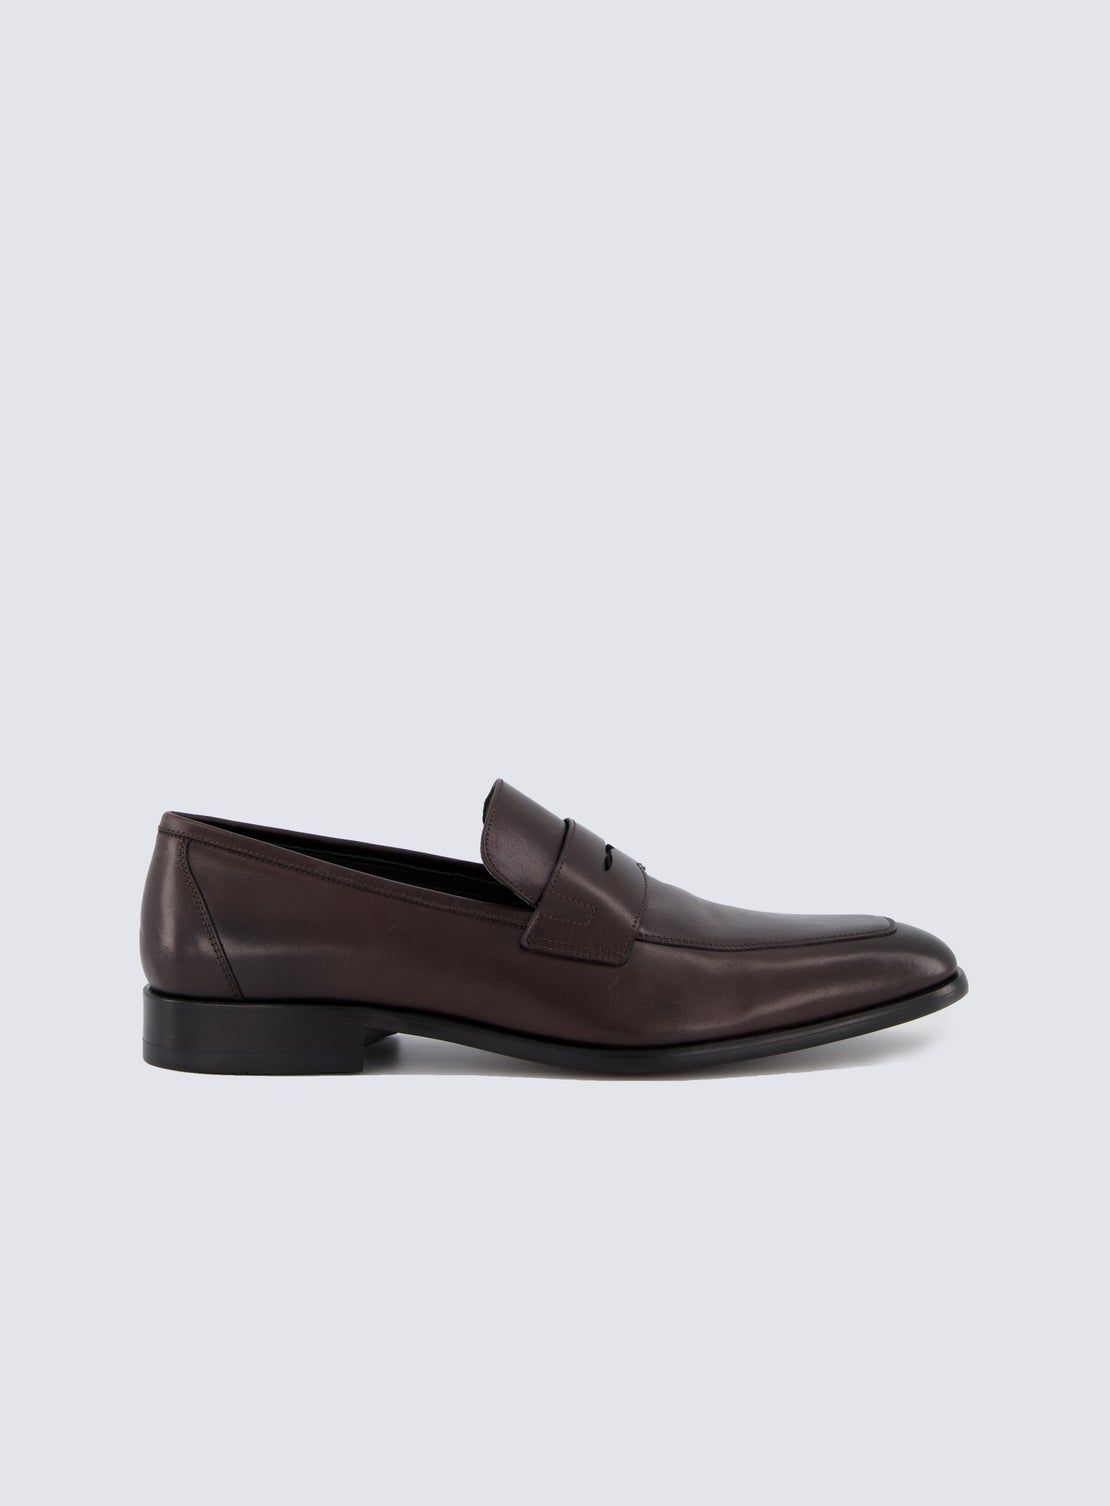 Weller Chocolate  Loafer